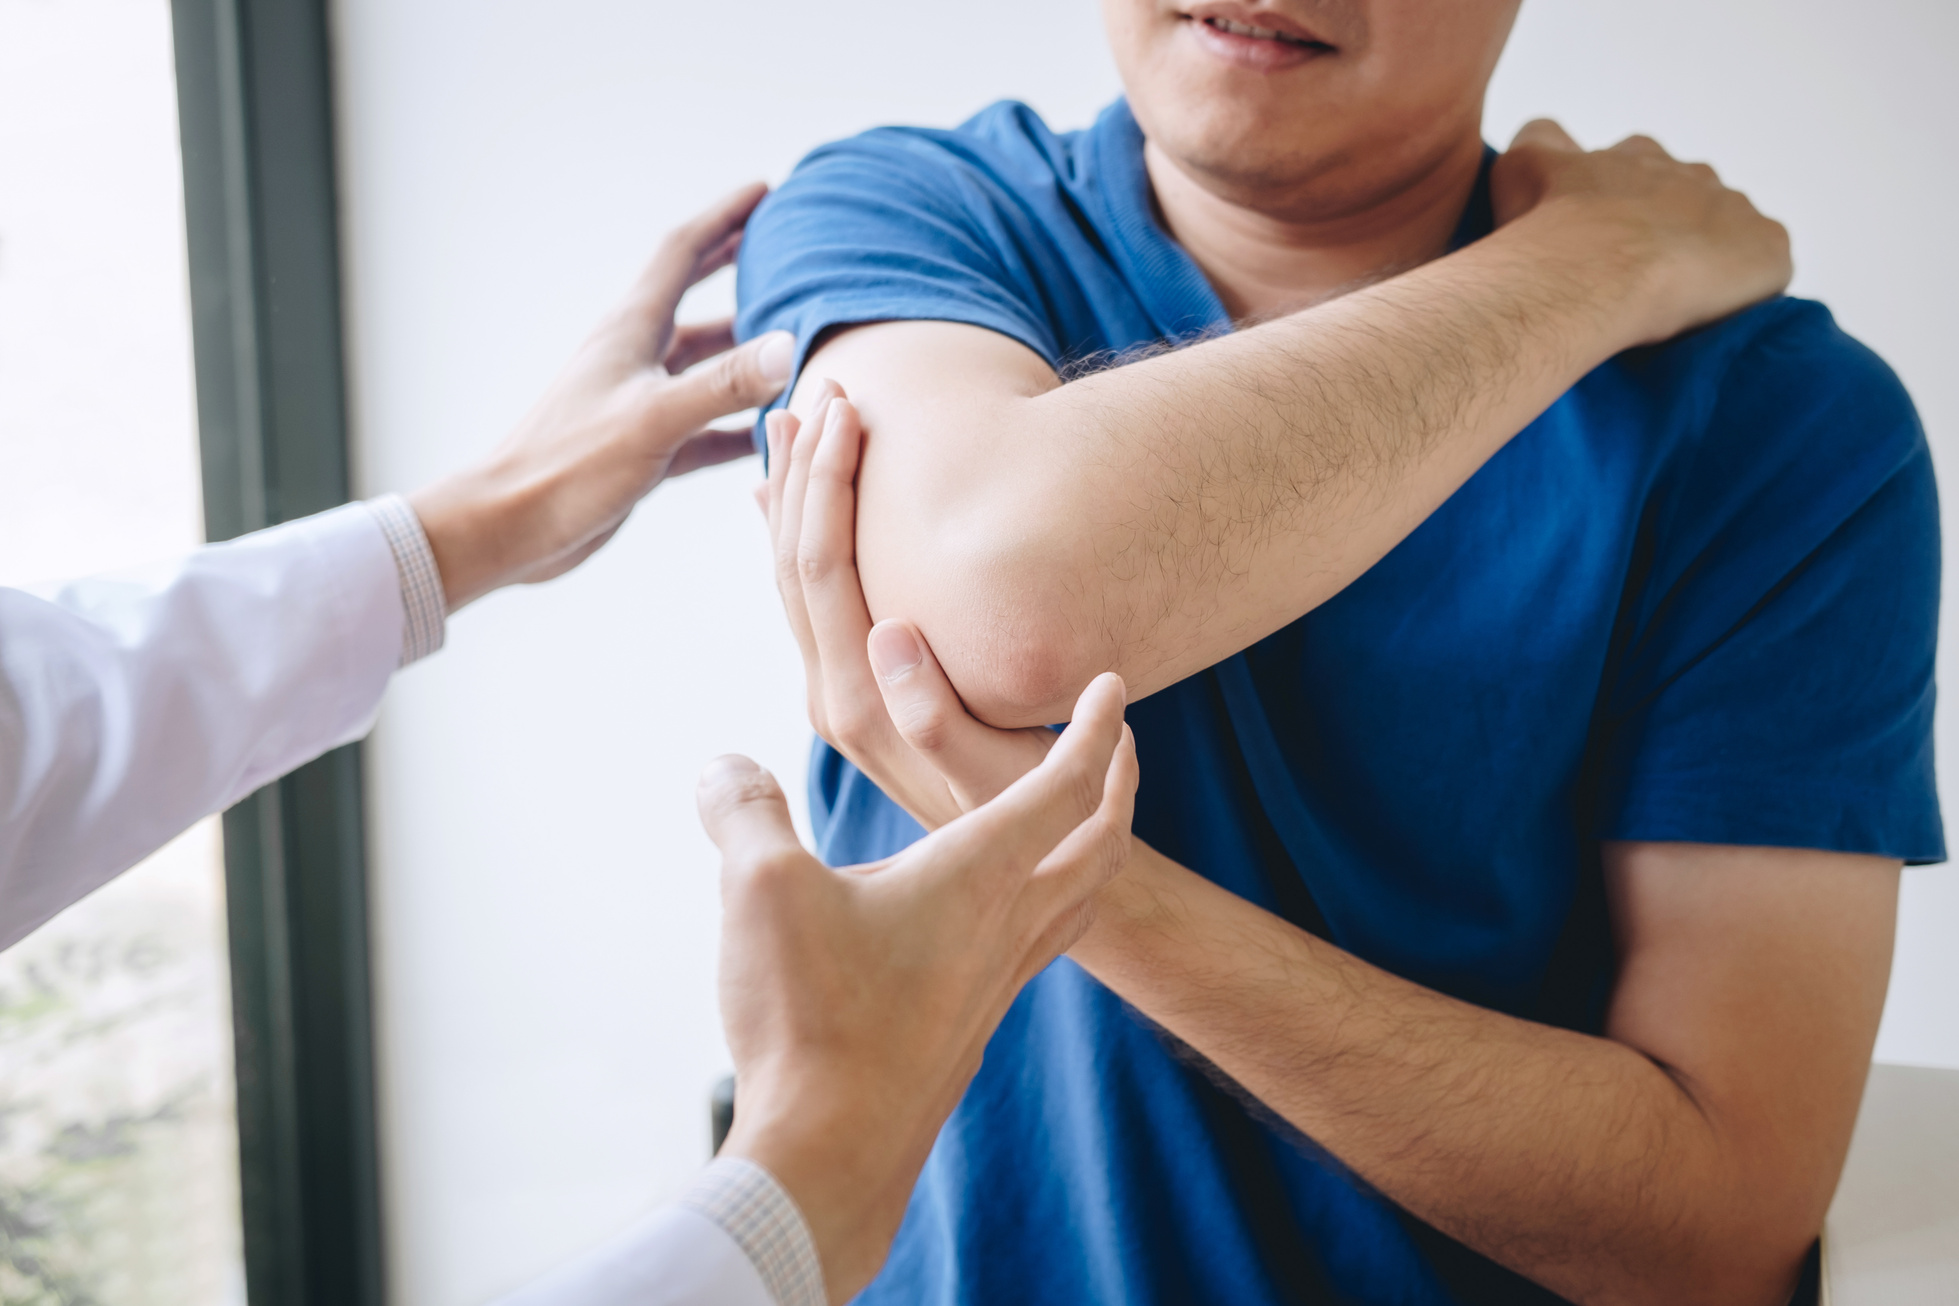 Doctor physiotherapist assisting a male patient while giving exercising treatment massaging the arm of patient in a physio room, rehabilitation physiotherapy concept